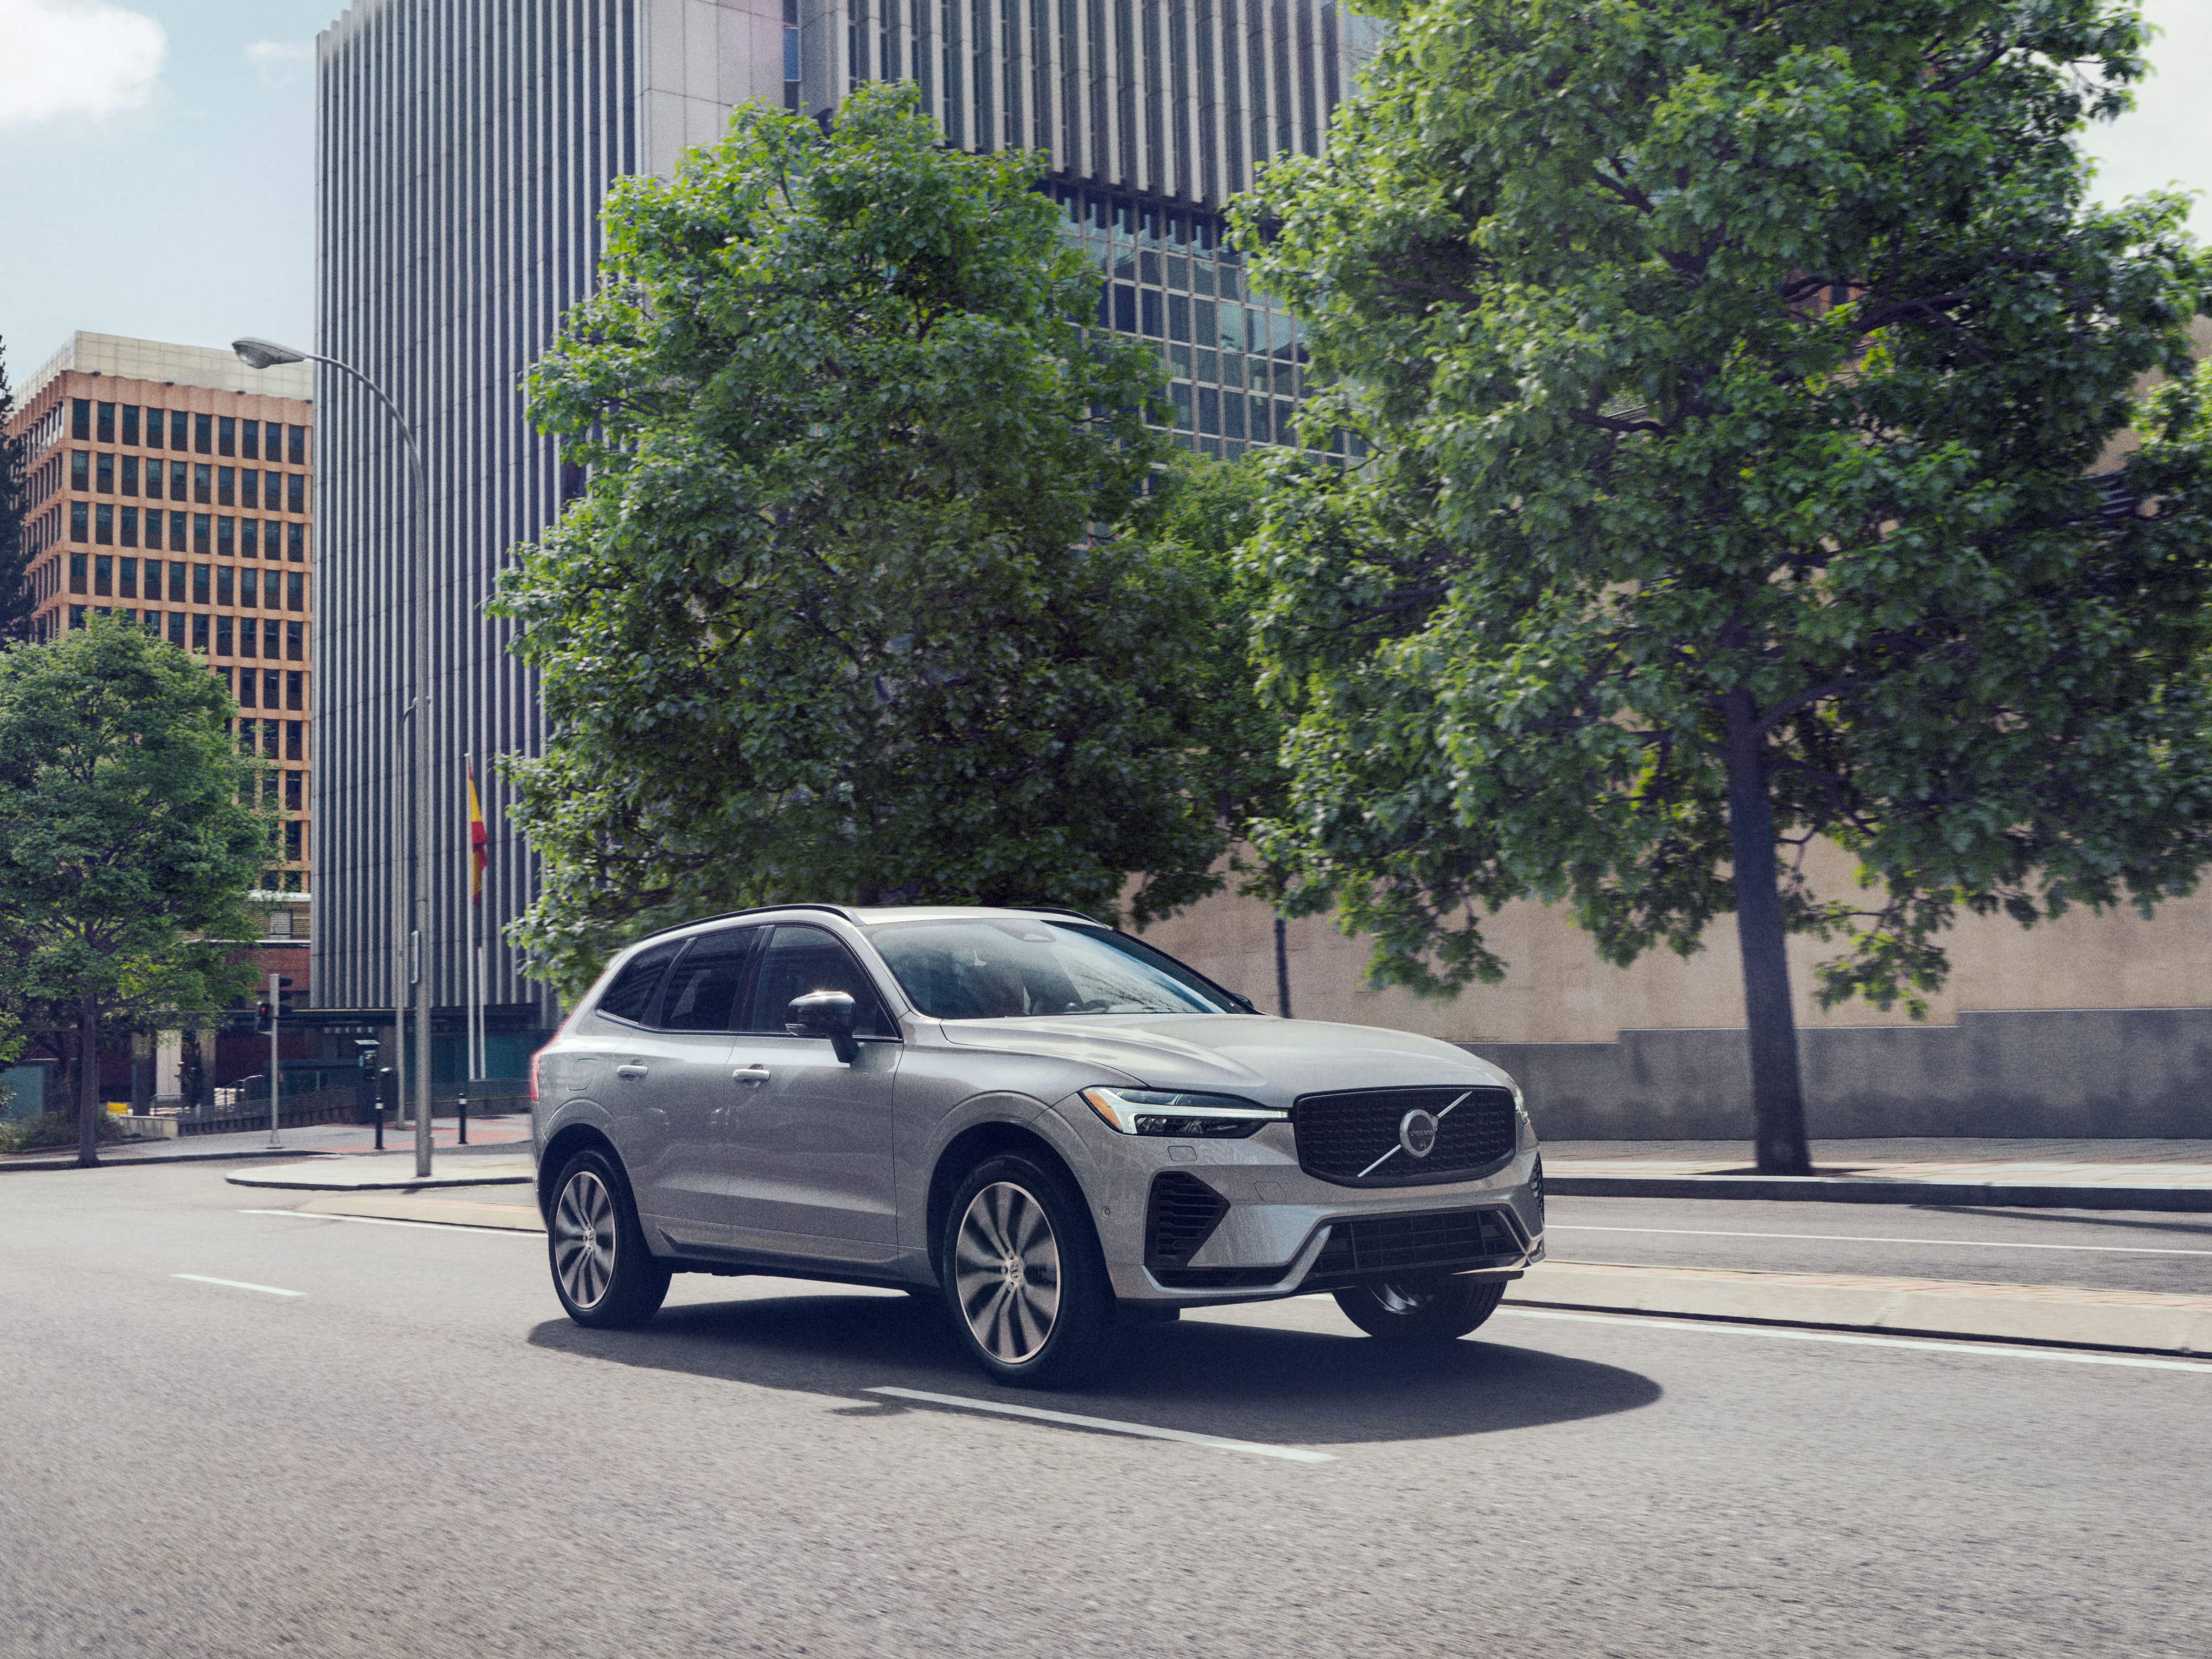 A Volvo XC60 Recharge plug-in hybrid driving in an urban environment with trees in the background.